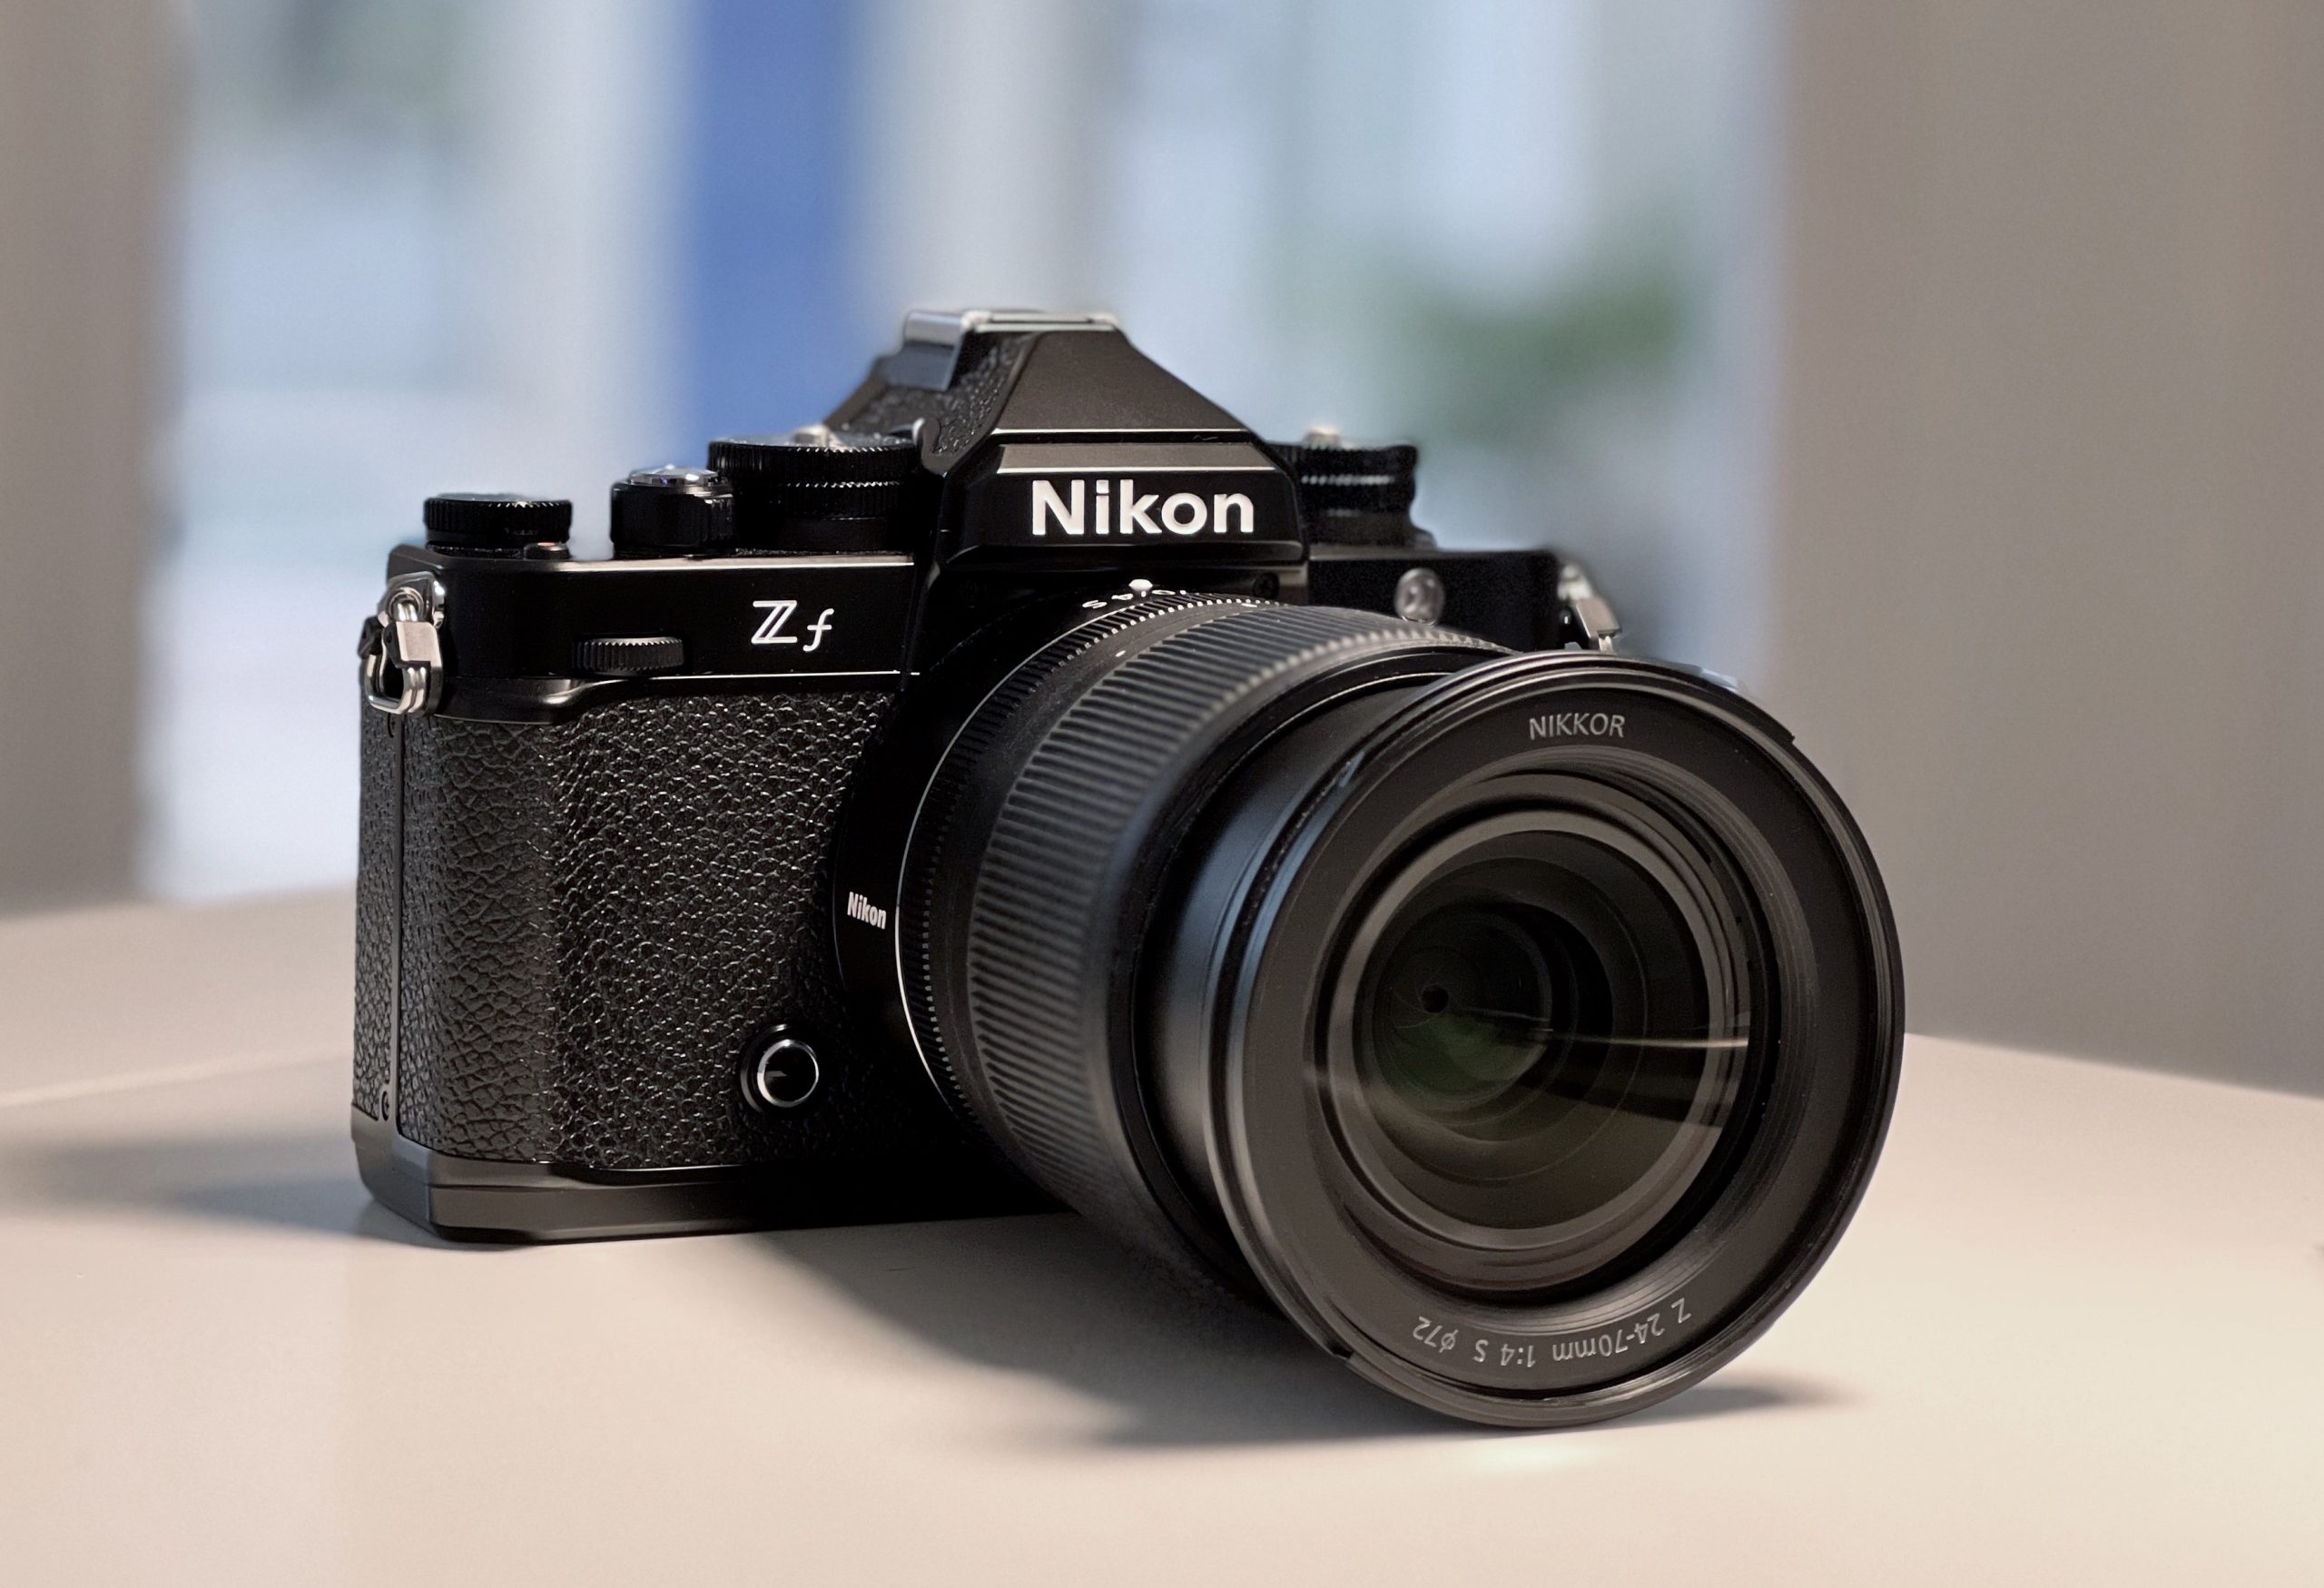 First Impressions of the Nikon Z f - Digital Imaging Reporter